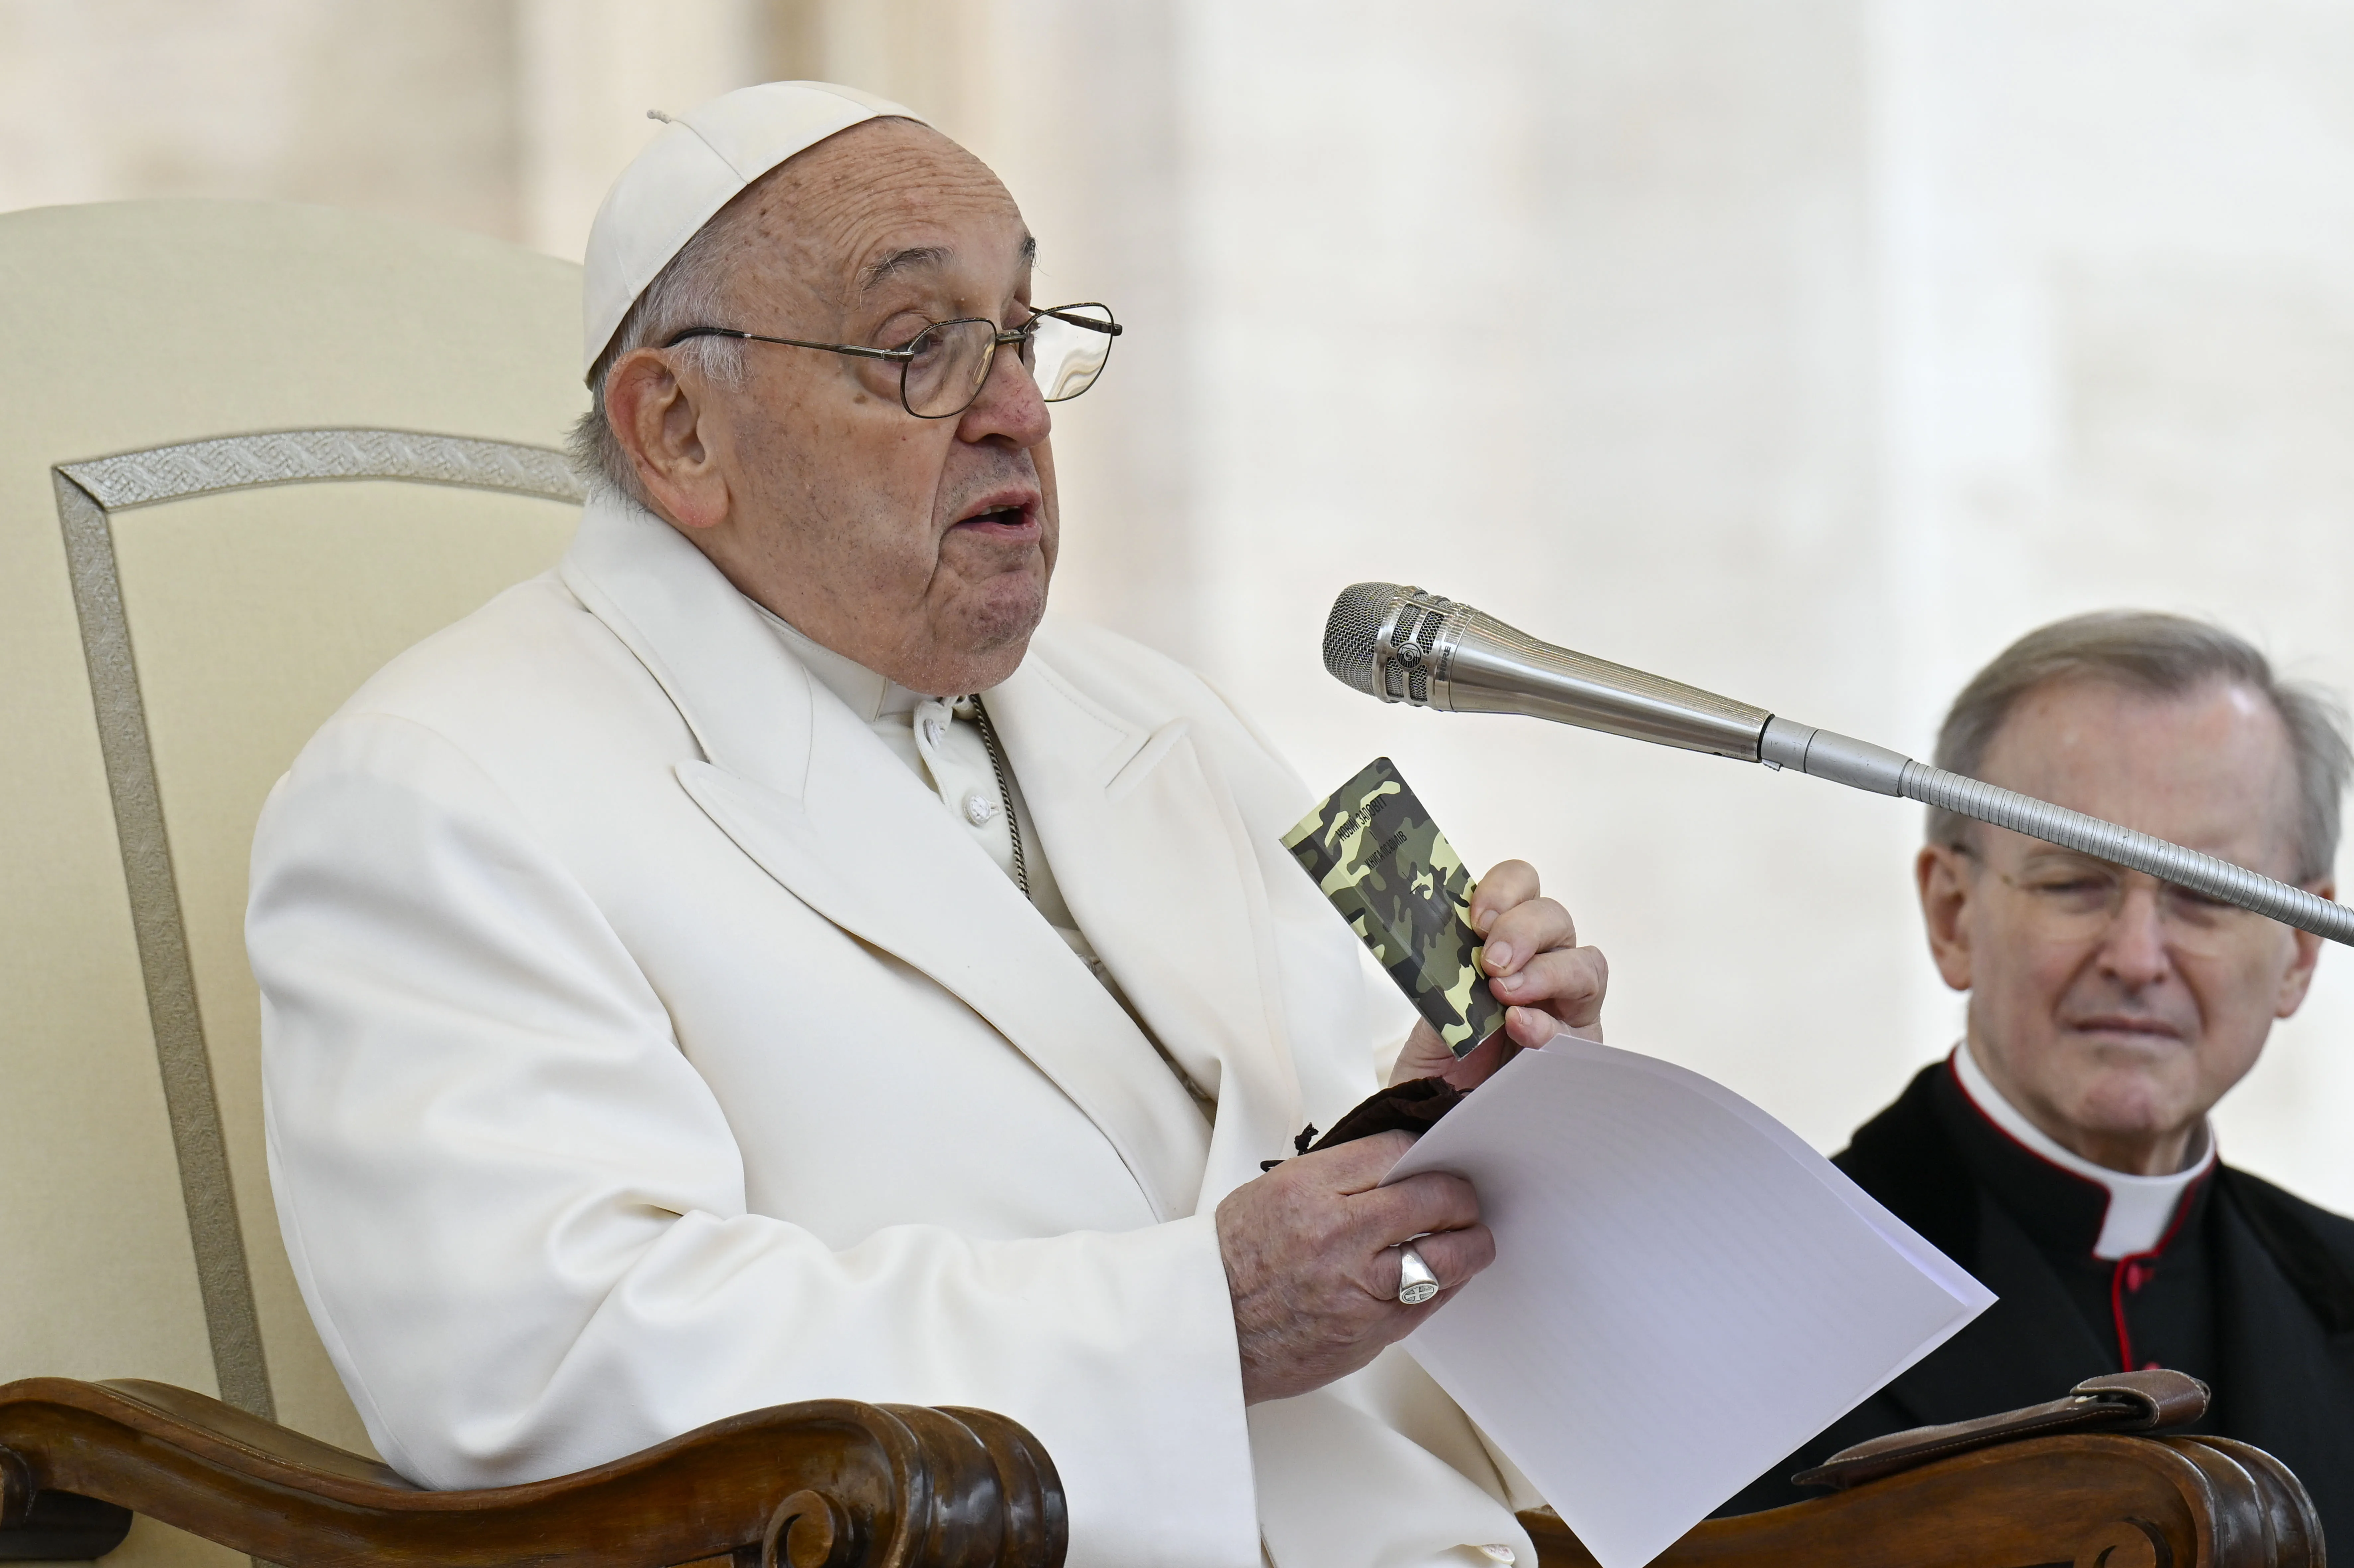 Pope Francis makes peace appeal while holding rosary of slain Ukrainian soldier